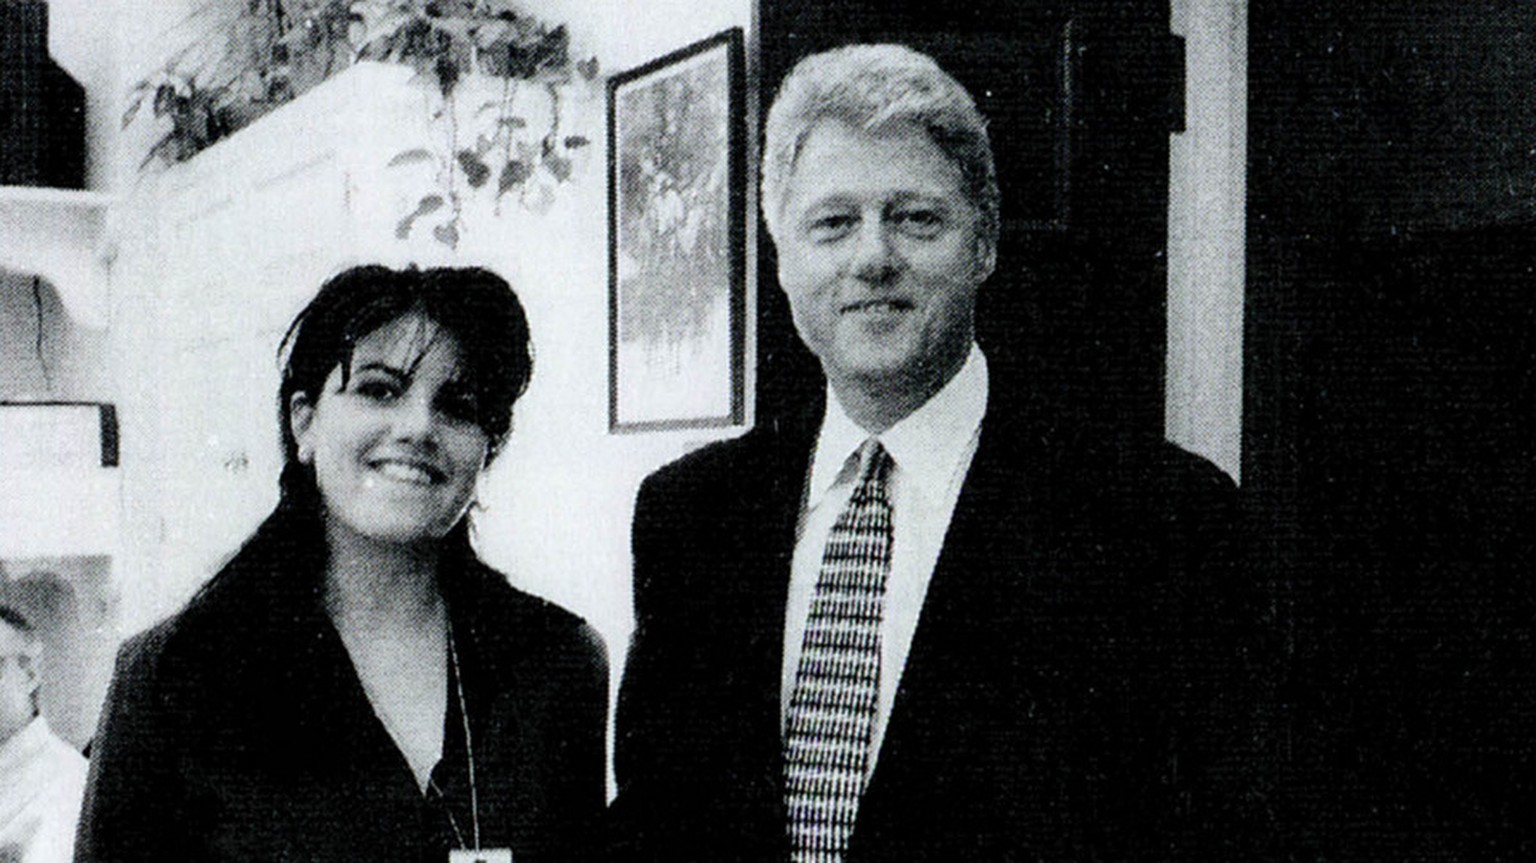 An official White House photo taken from page 3179 of Independent Counsel Kenneth Starr's report on US President Bill Clinton, showing him and White House intern Monica Lewinsky in the White House...